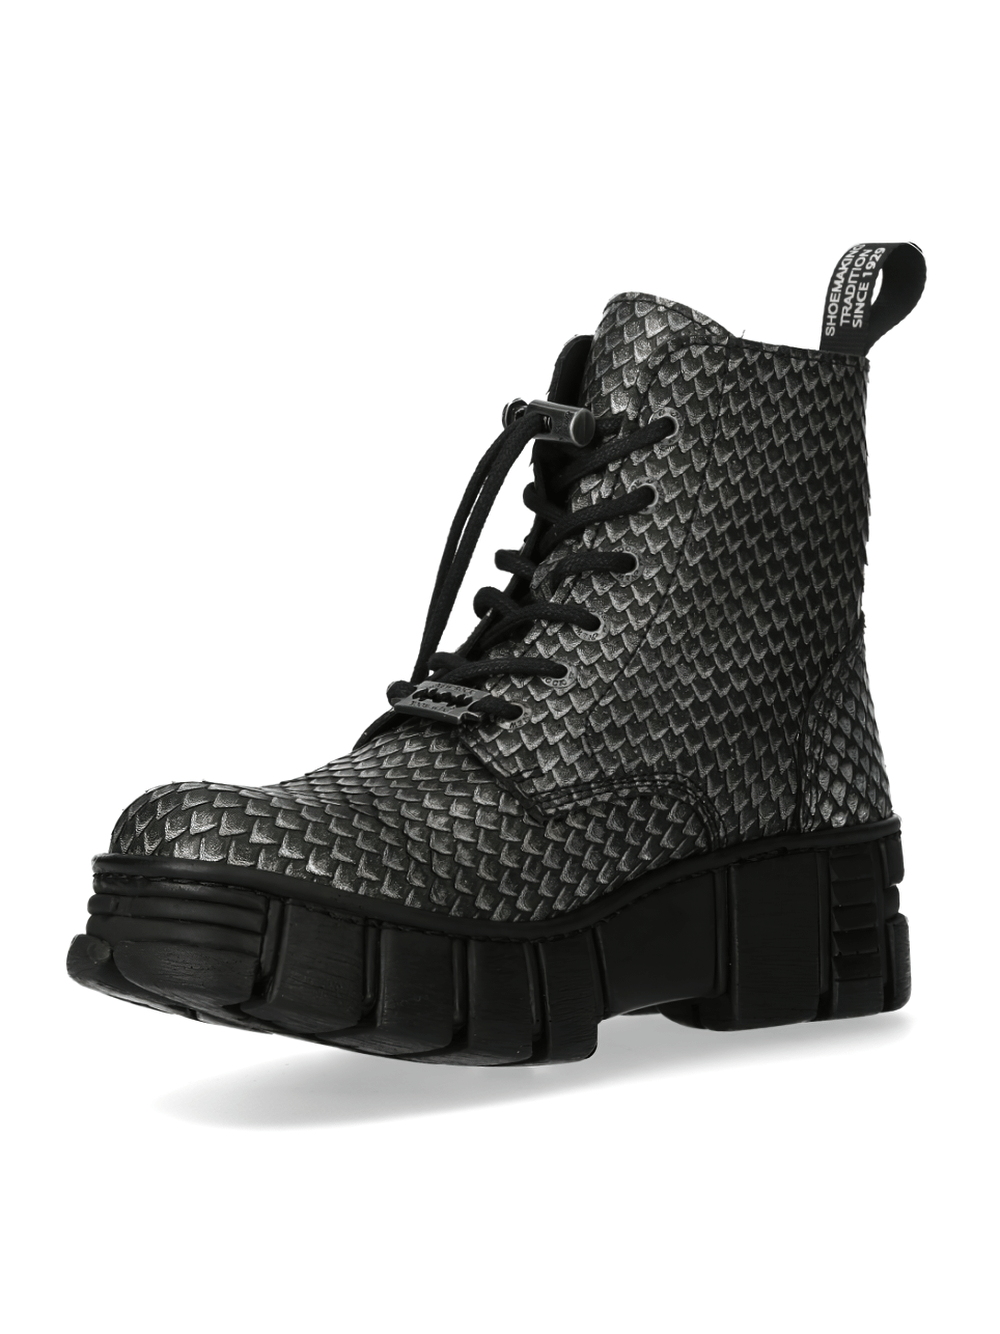 NEW ROCK Urban Textured Scale Black Lace-Up Boots